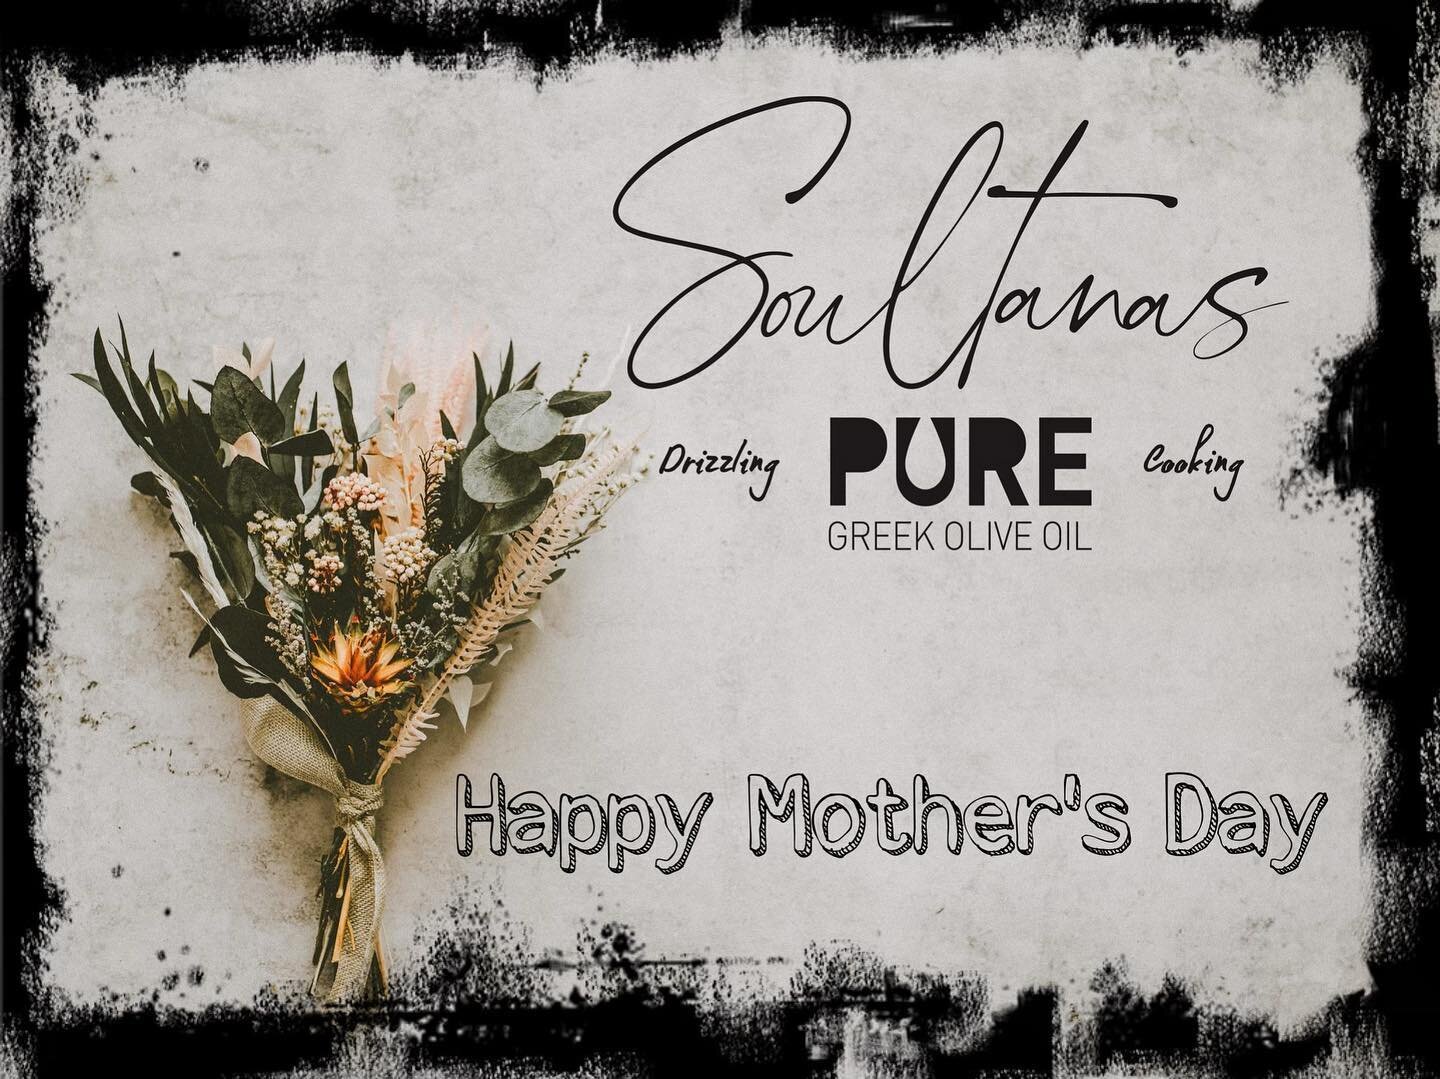 💐HAPPY MOTHER&rsquo;S DAY💐
.
To all the women who nourish, love, and protect the people around them 🌸
.
.
@soultanasgreekoliveoil 
.
#soultanasgreekoliveoil #mothersday2021